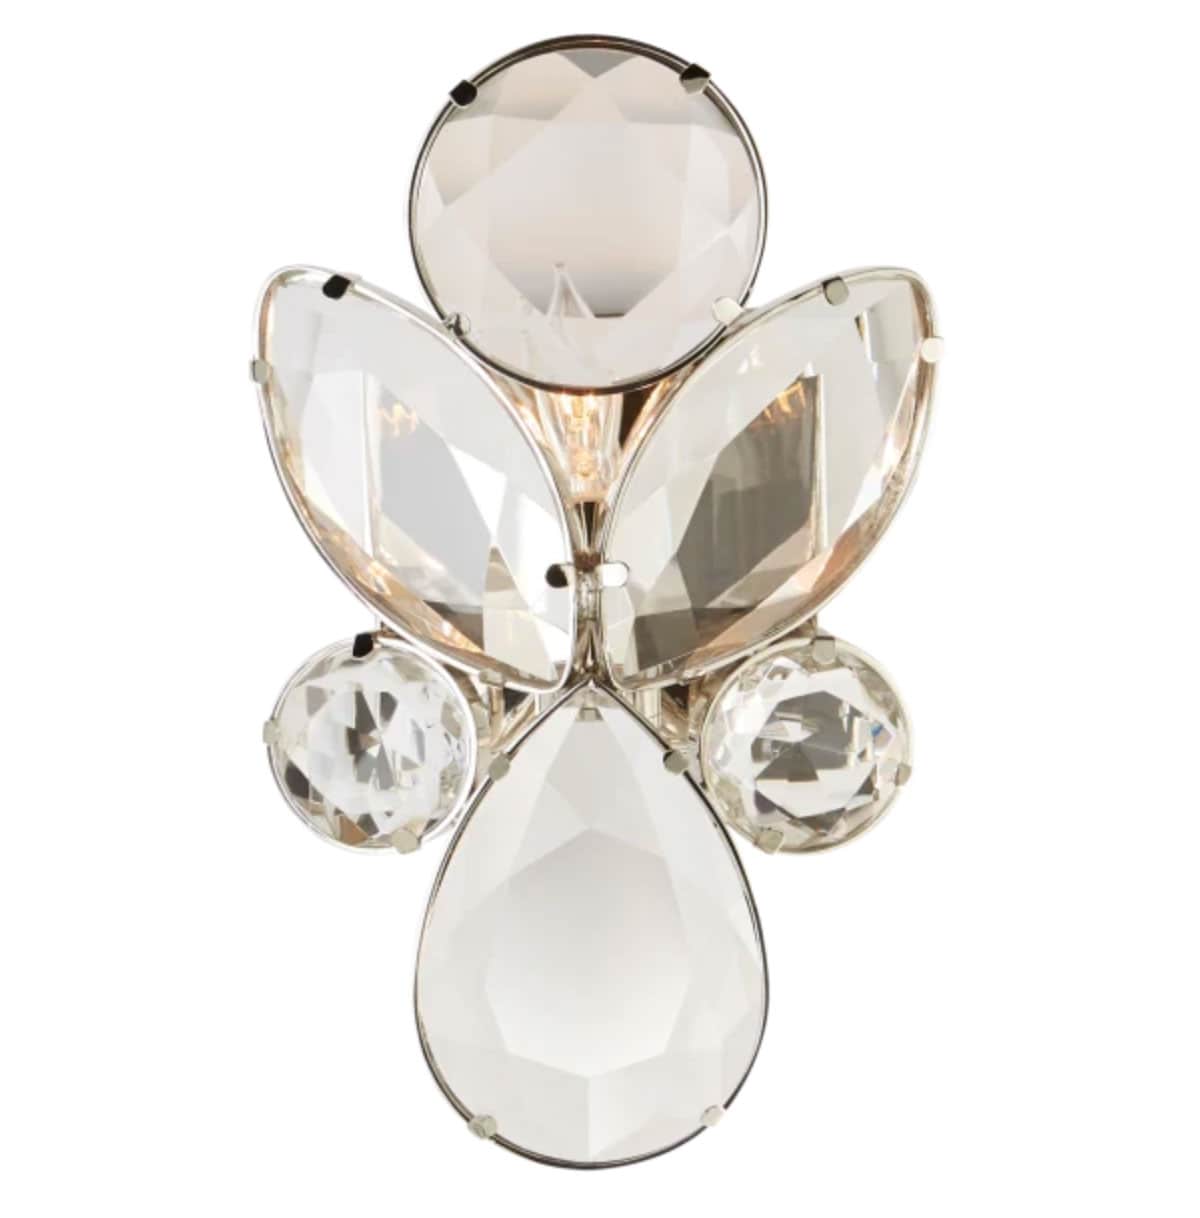 Jeweled sconce by Kate Spade and Circa Lighting